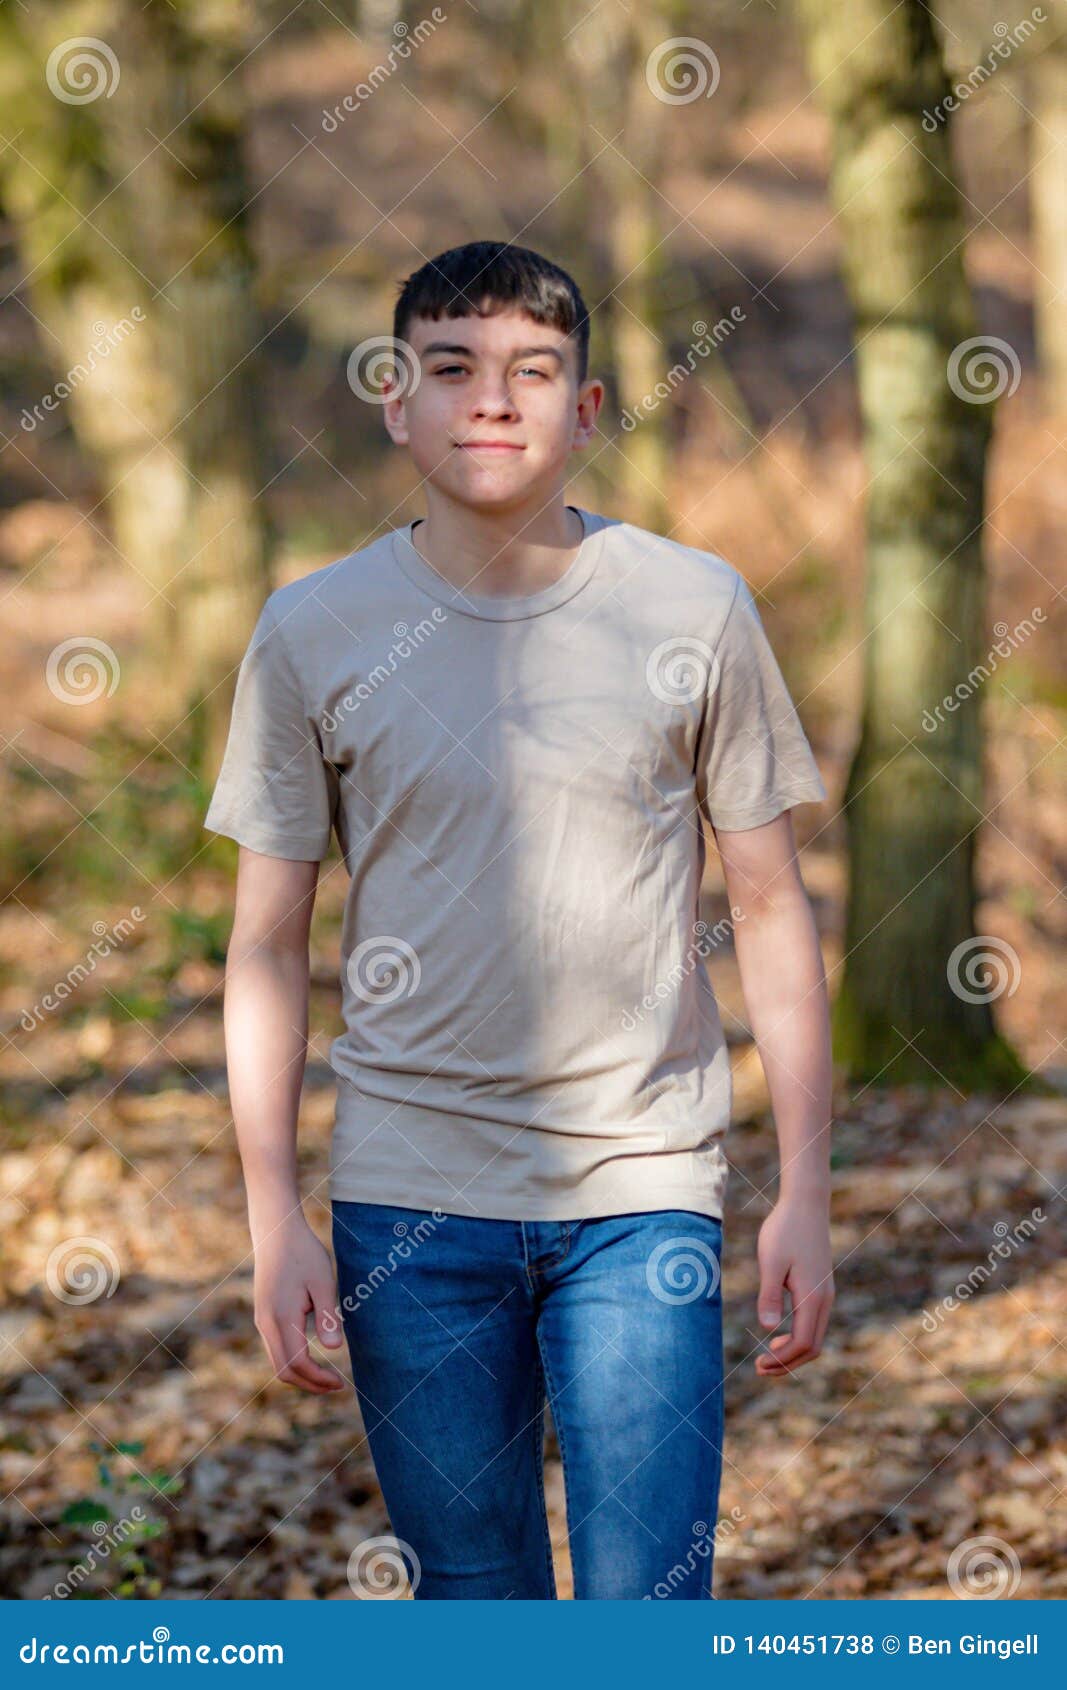 Teenage Boy Outside on a Bright Spring Day Stock Photo - Image of jeans ...